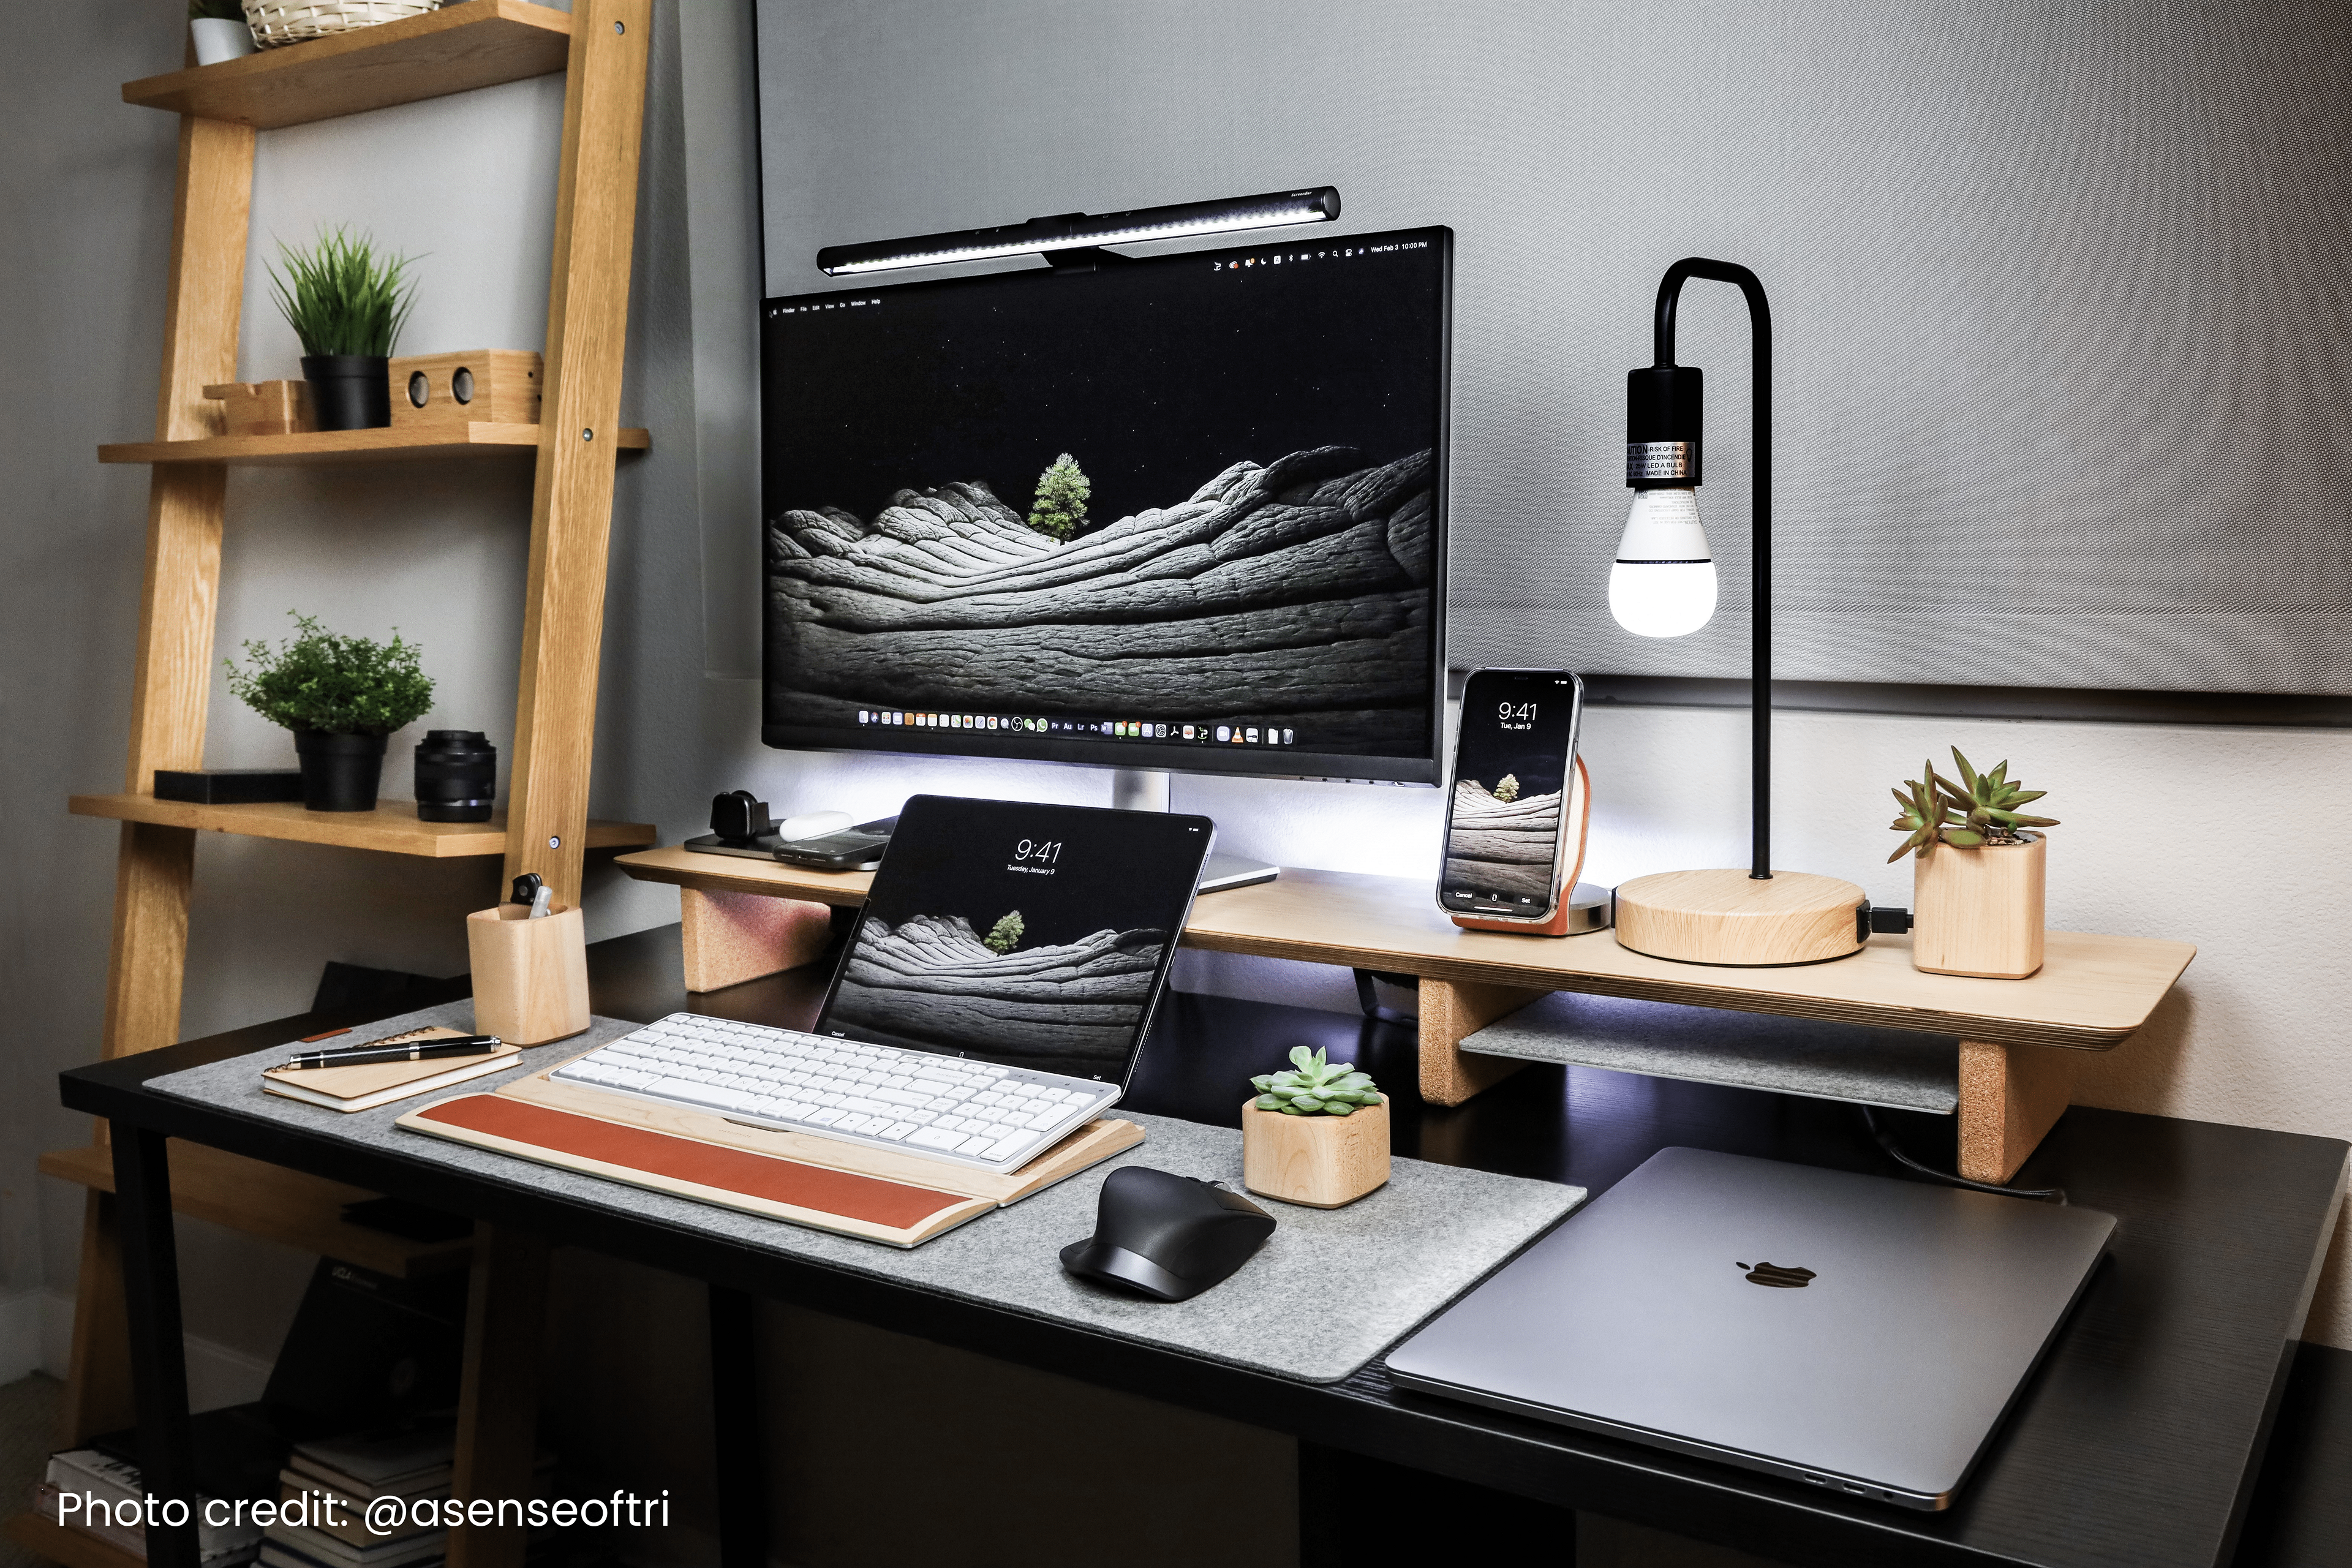 BenQ monitor light bars help you build a comfortable laptop workspace.